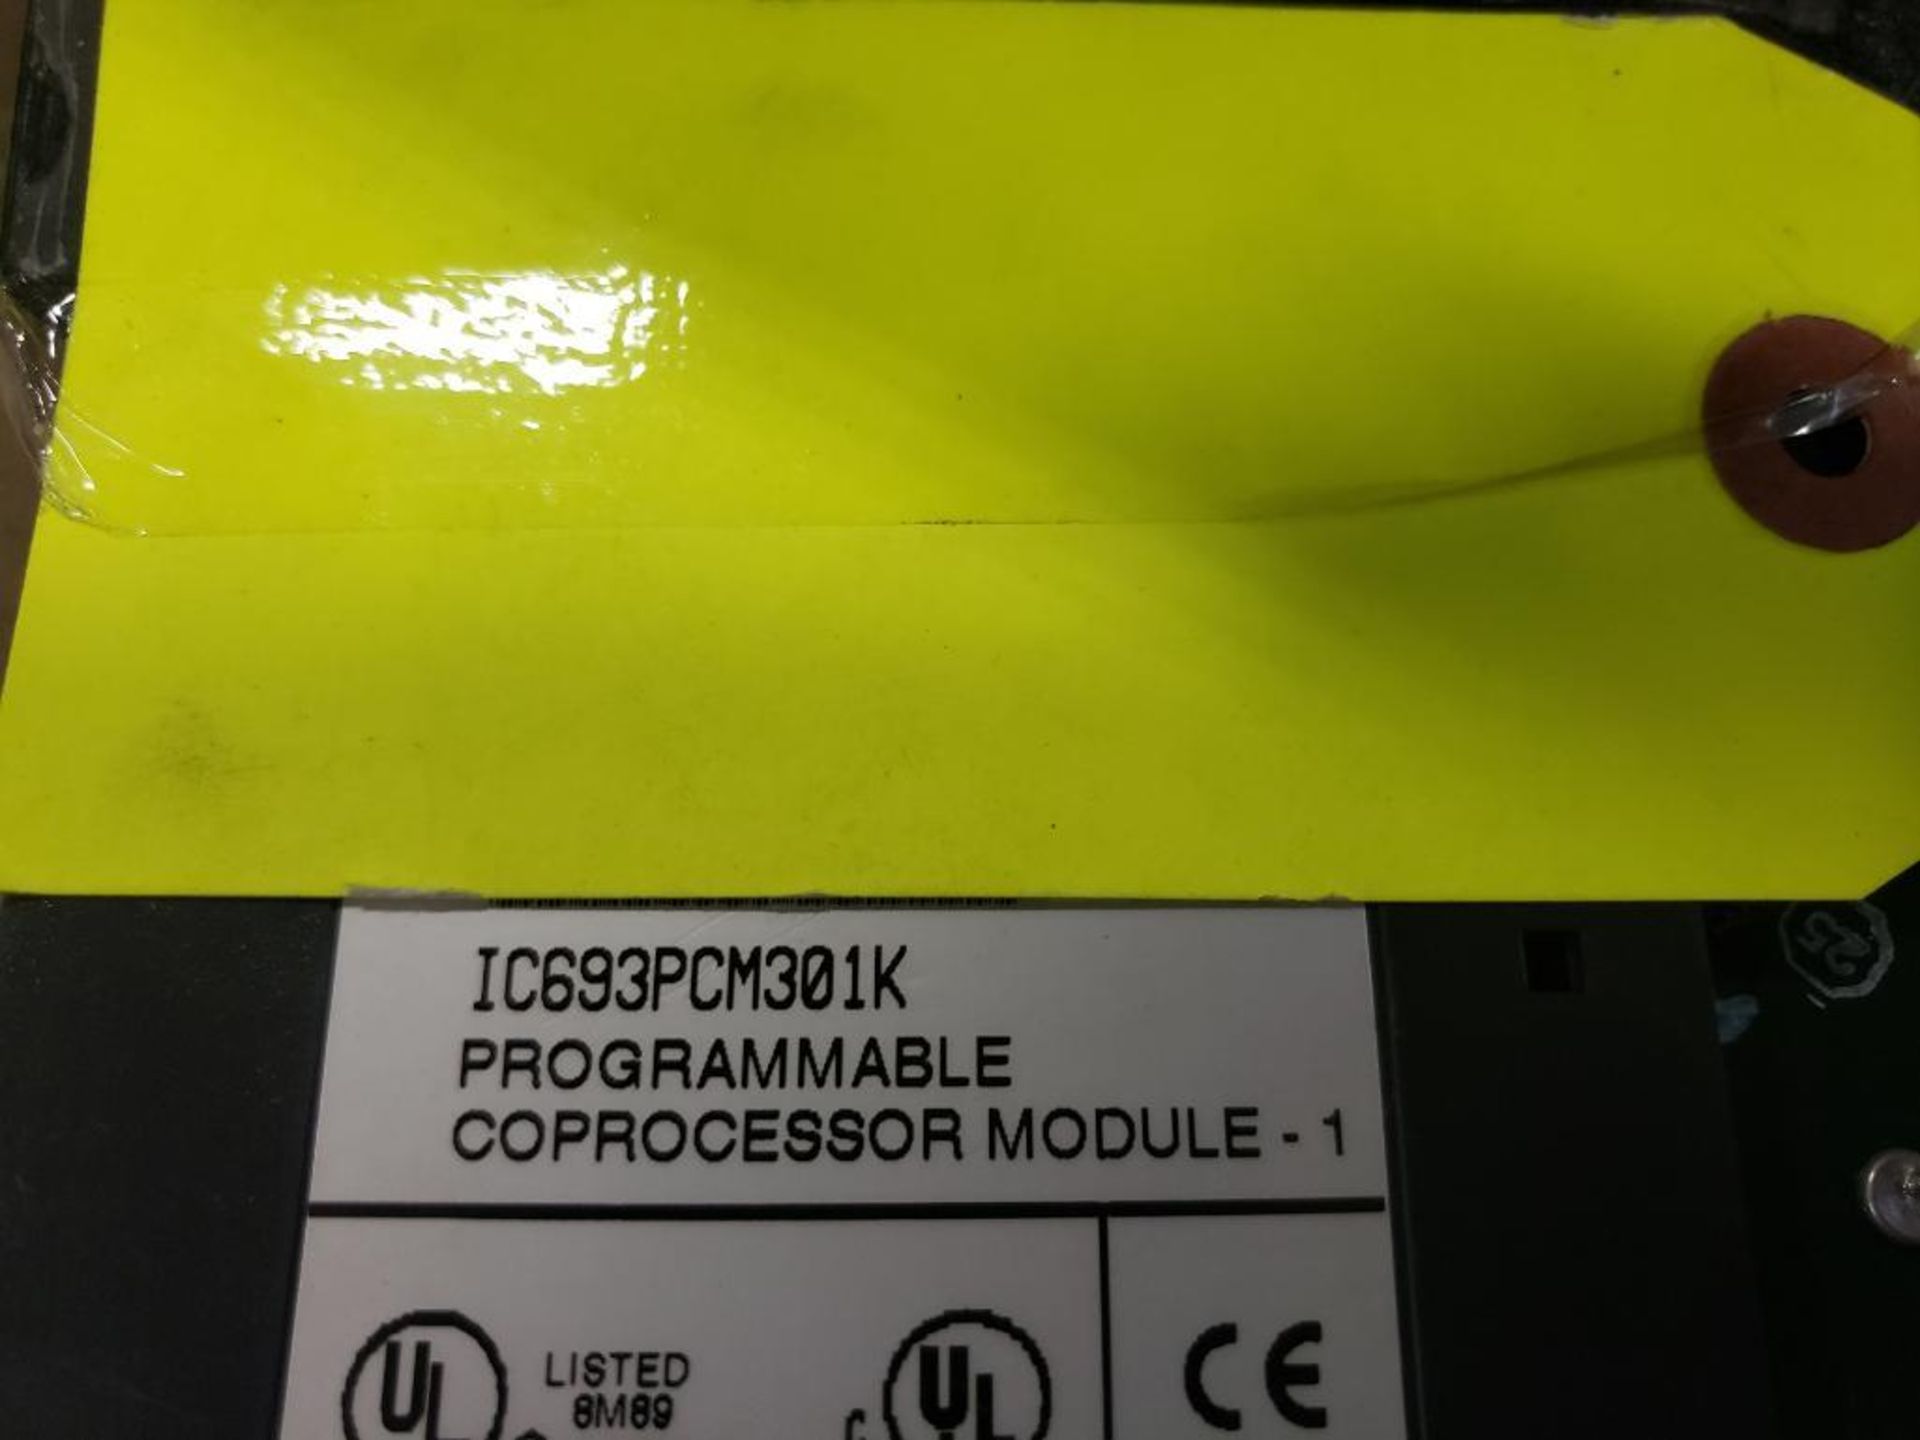 Qty 4 - GE Fanuc IC693PCM301K programmable coprocessor module. - Image 5 of 6